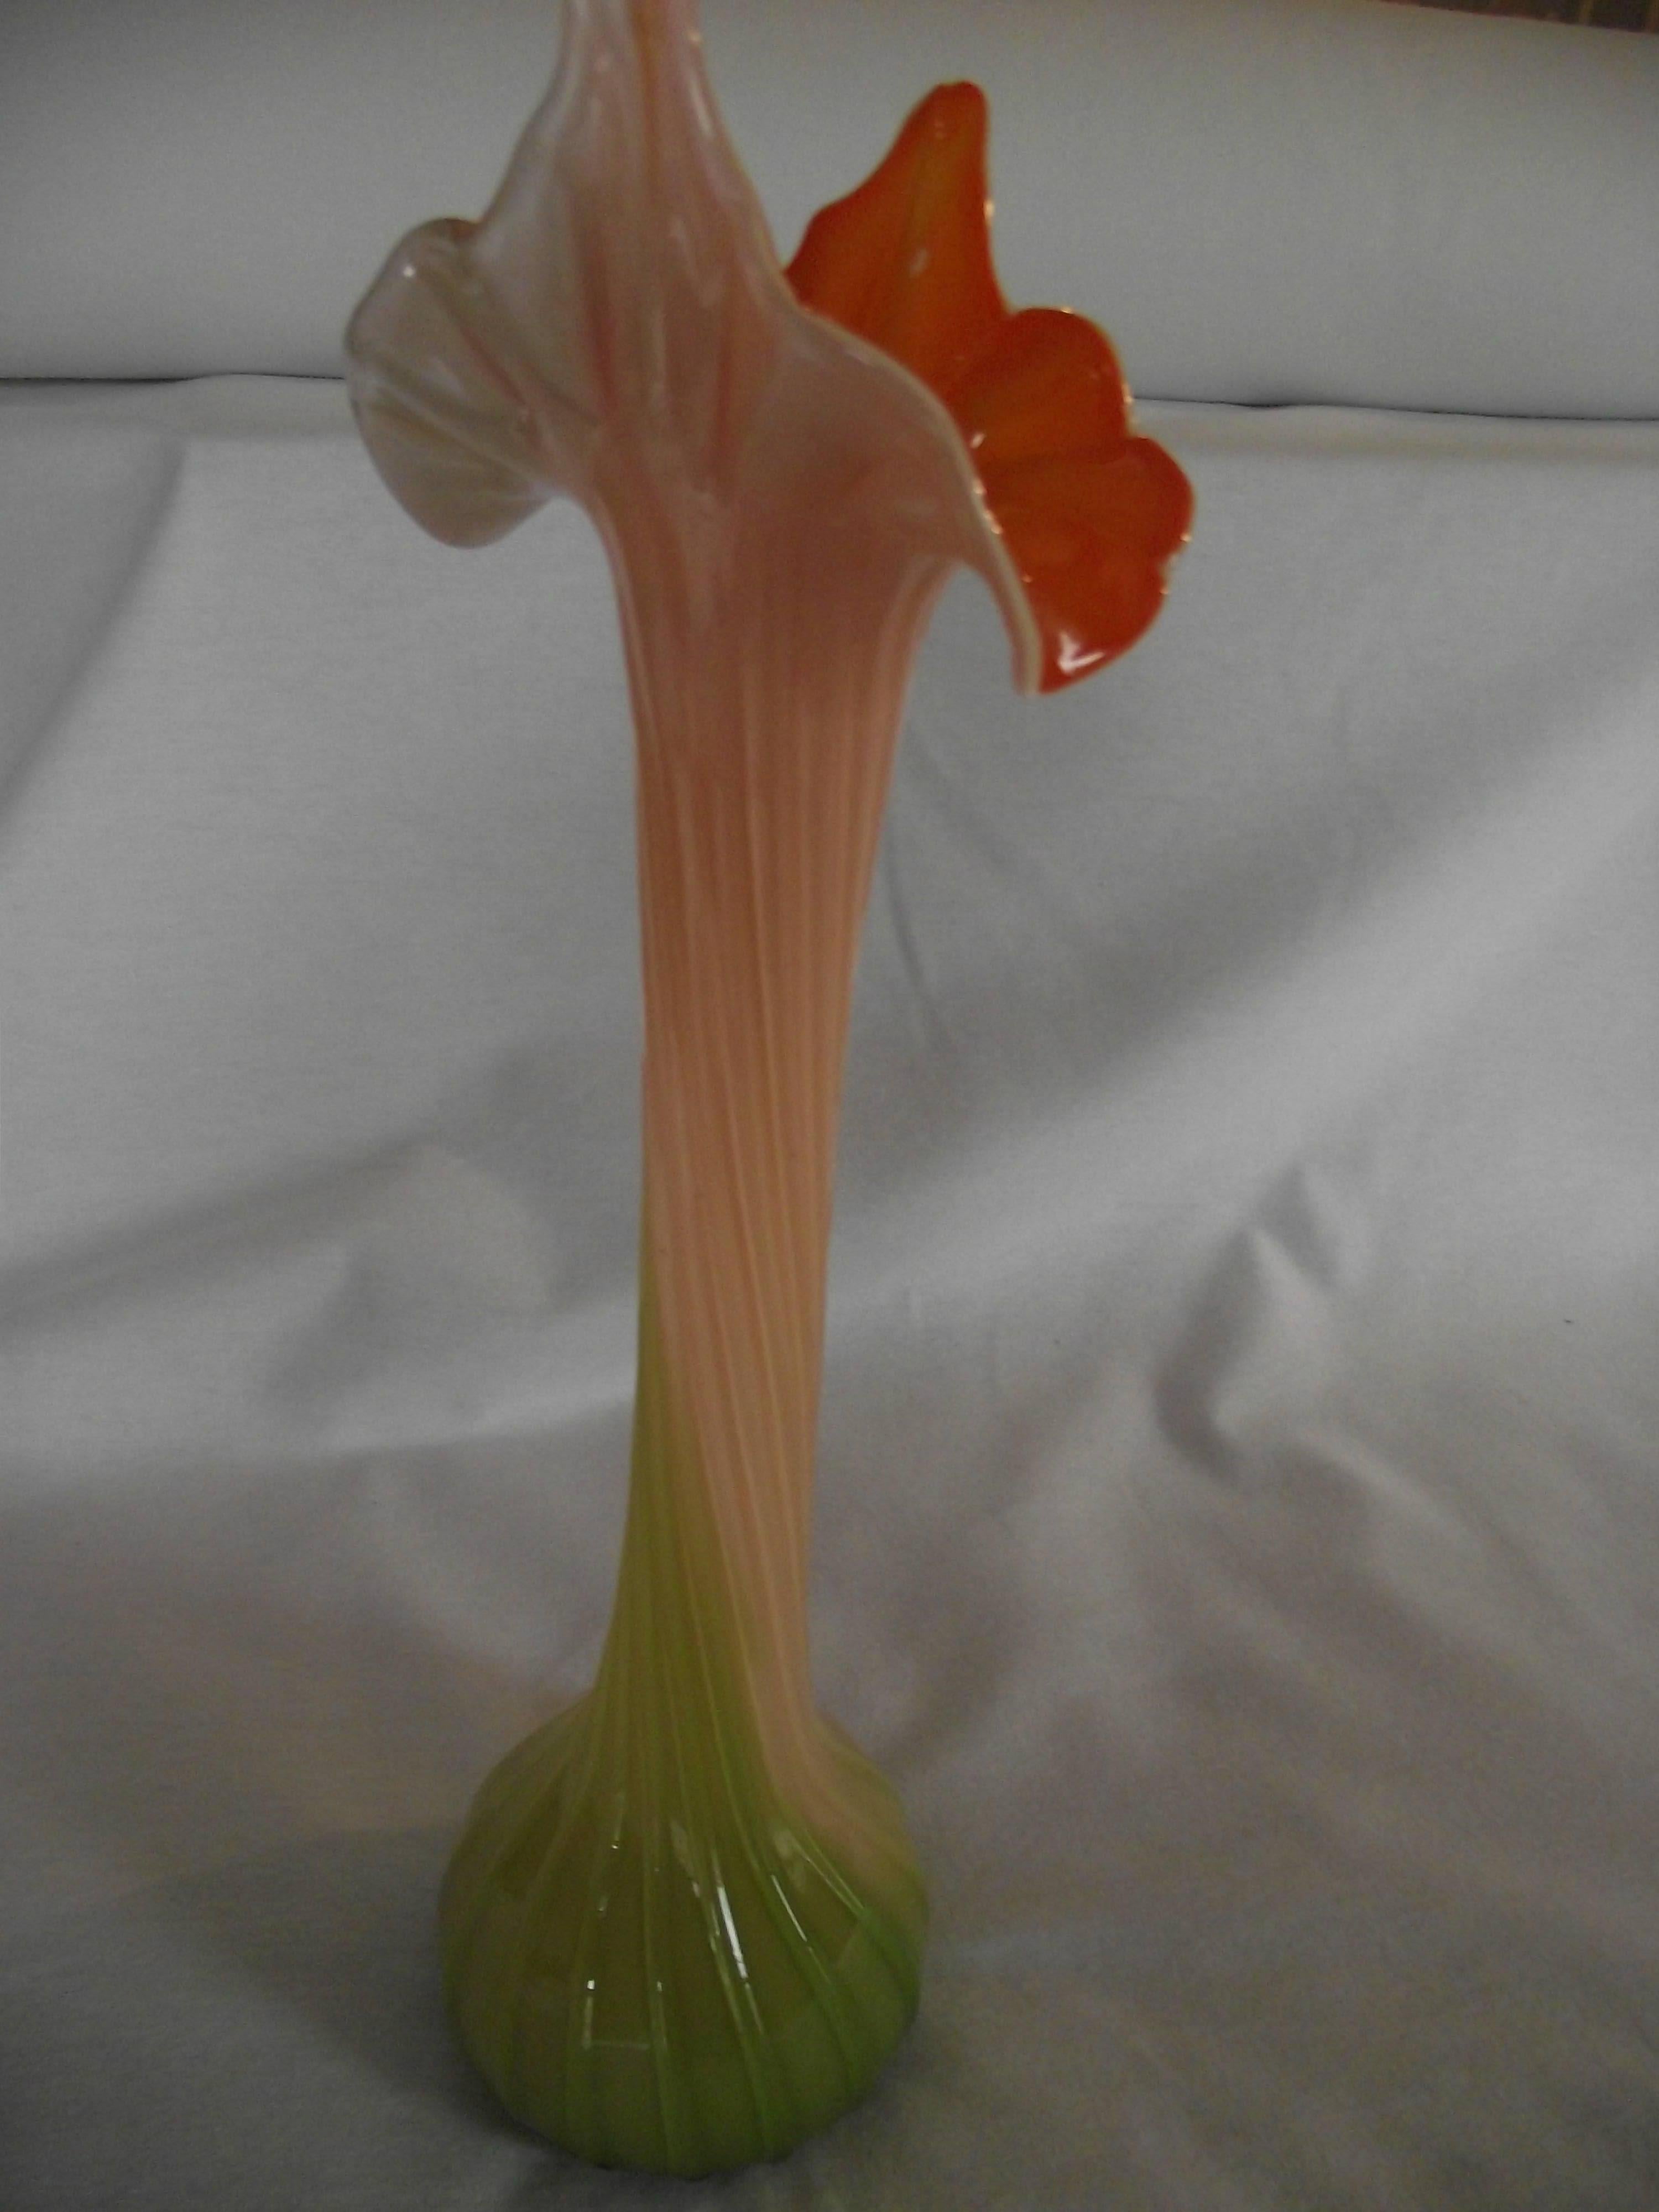 This Art Nouveau vase is plucked right from nature. Modeled after the 